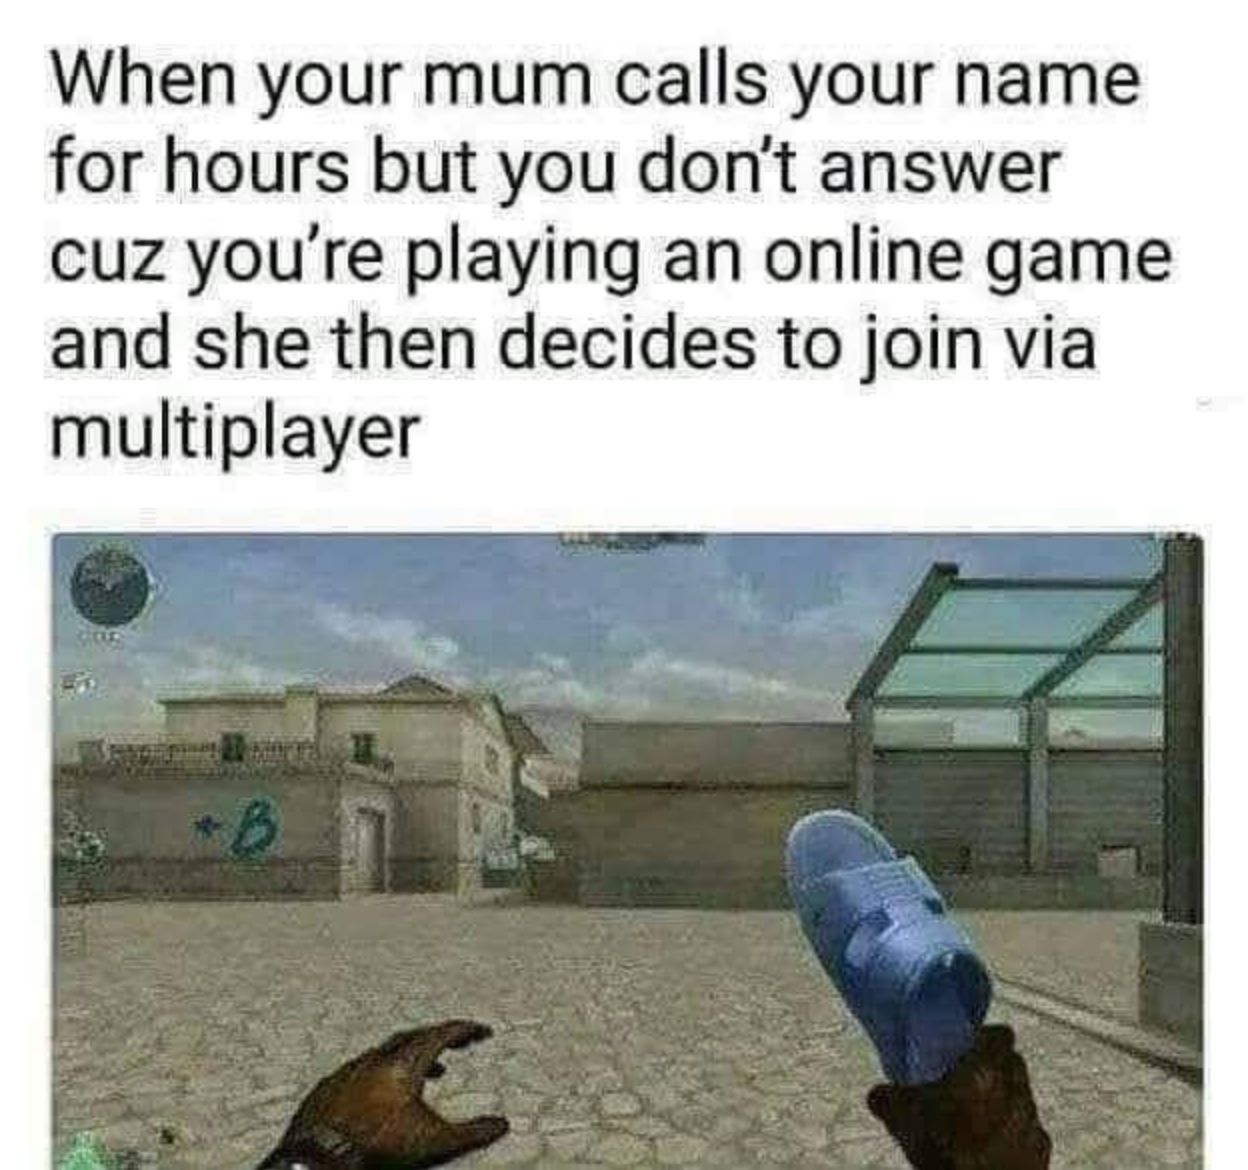 your mom joins the game - When your mum calls your name for hours but you don't answer cuz you're playing an online game and she then decides to join via multiplayer B